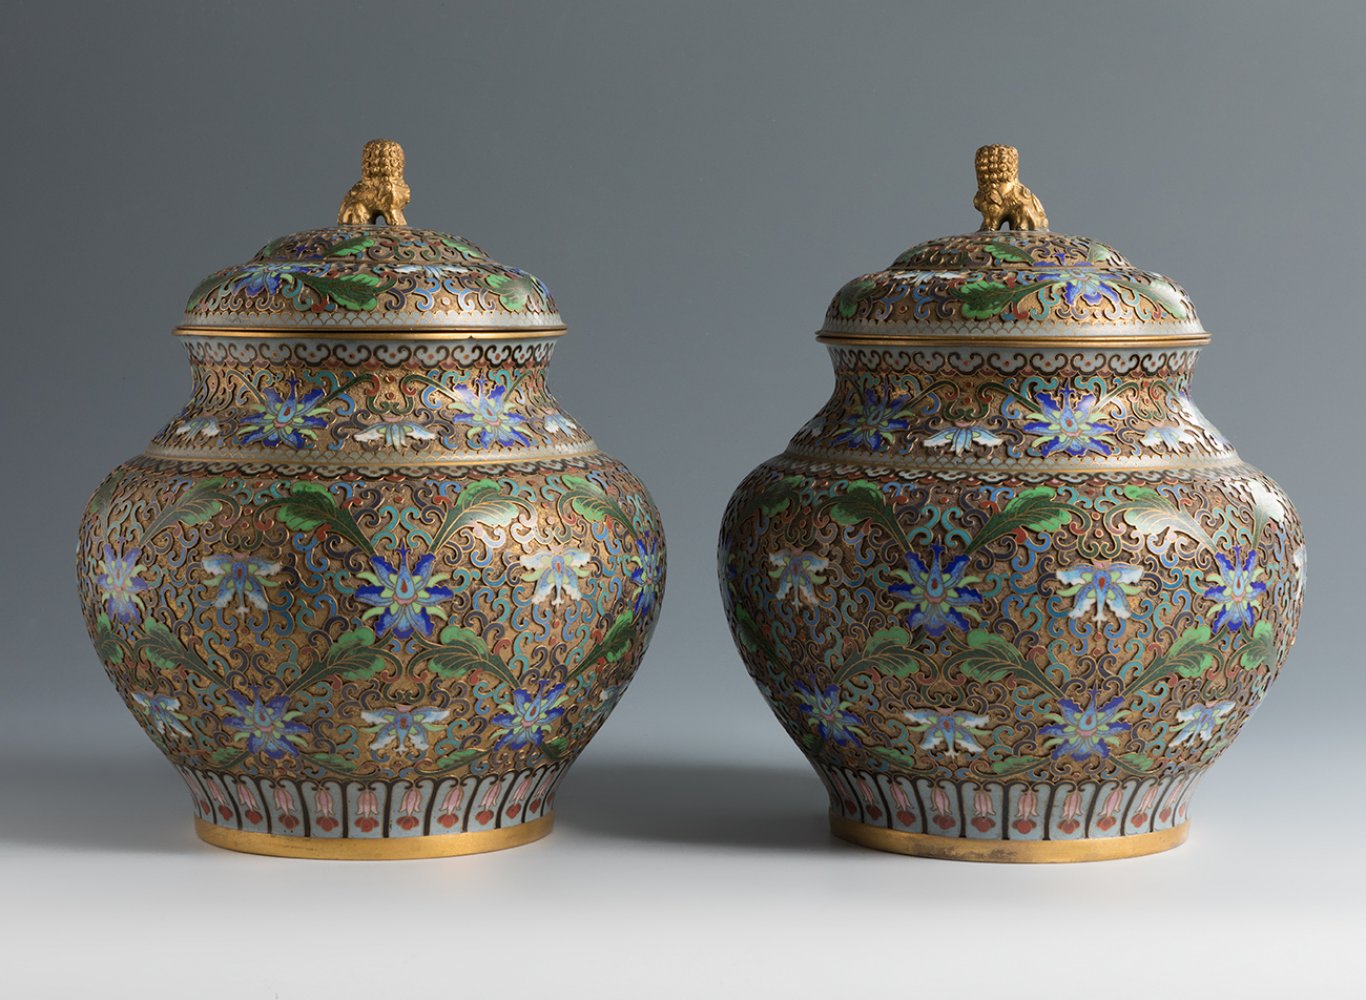 Pair of ginger storage jars. China, 1920-1940.Bronze and cloisonné enamel. Carved wooden bases. - Image 3 of 4